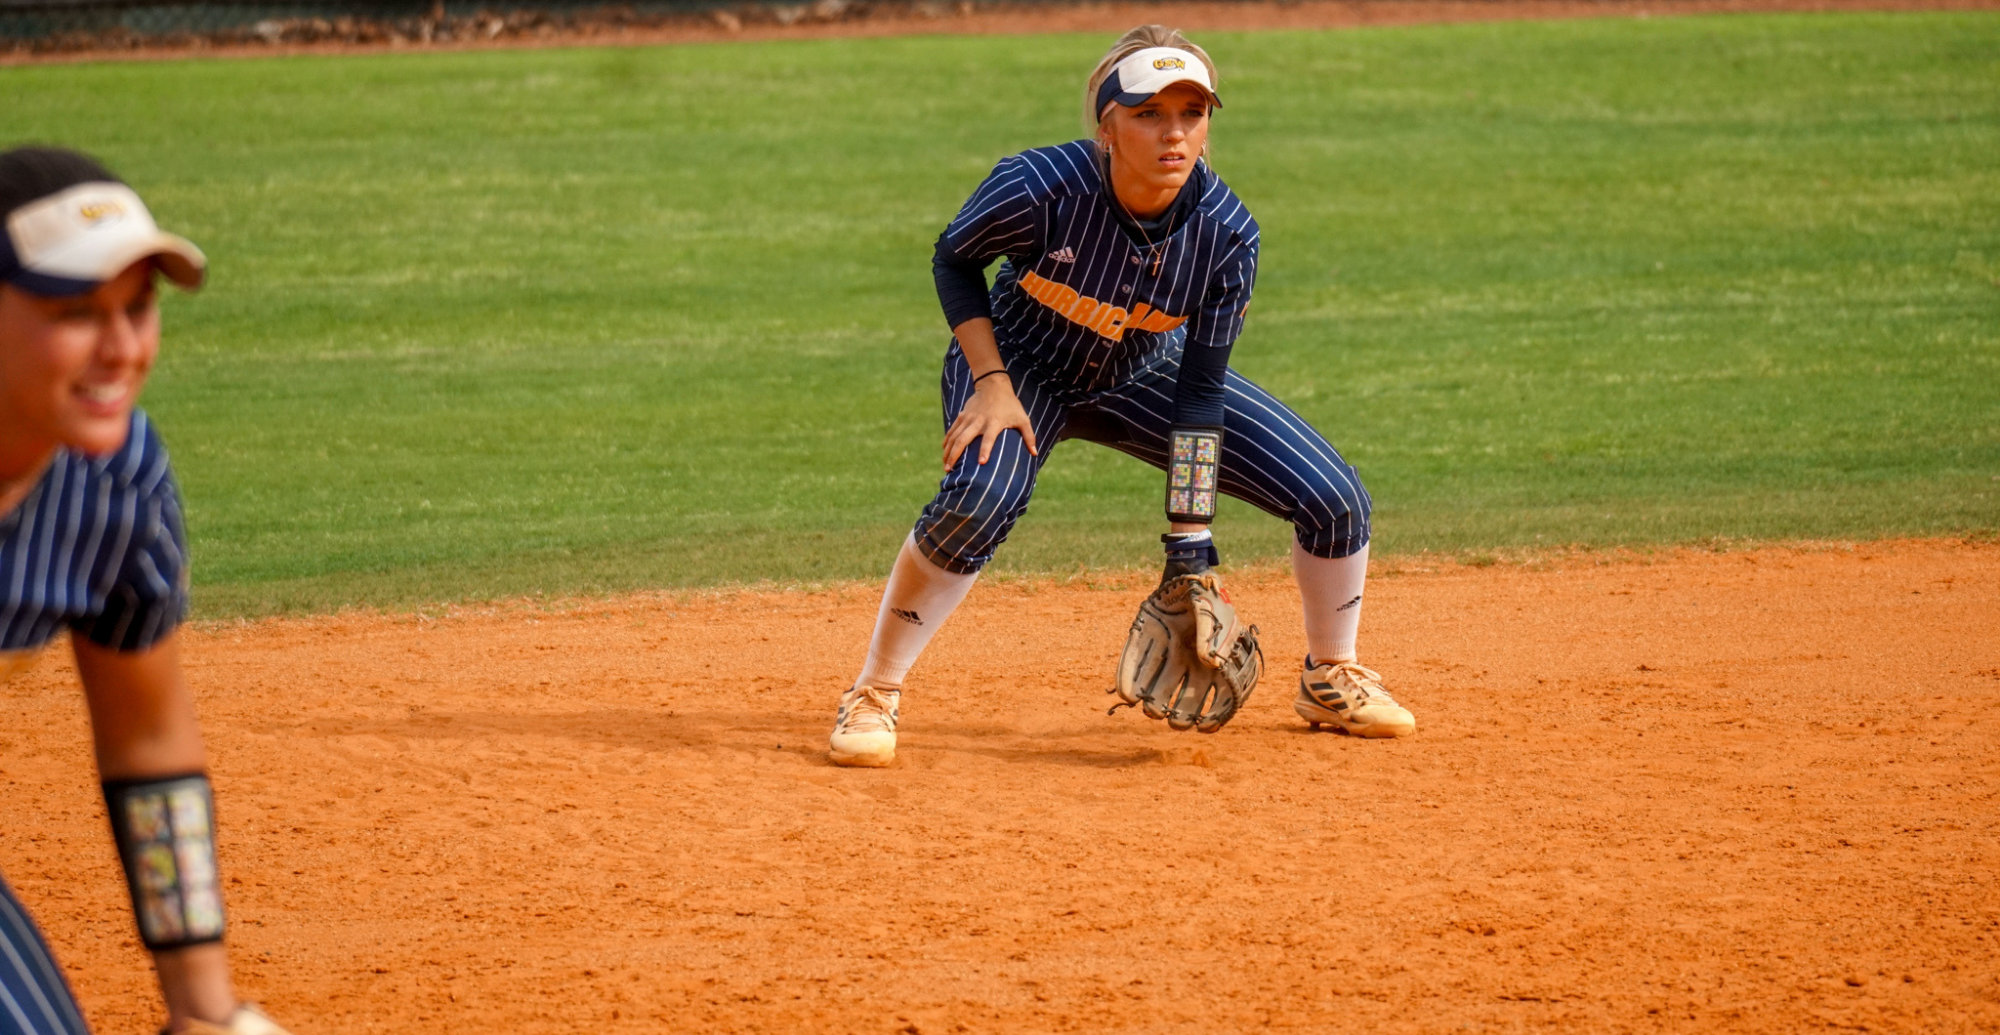 Lady Canes Drop Series Against Columbus State